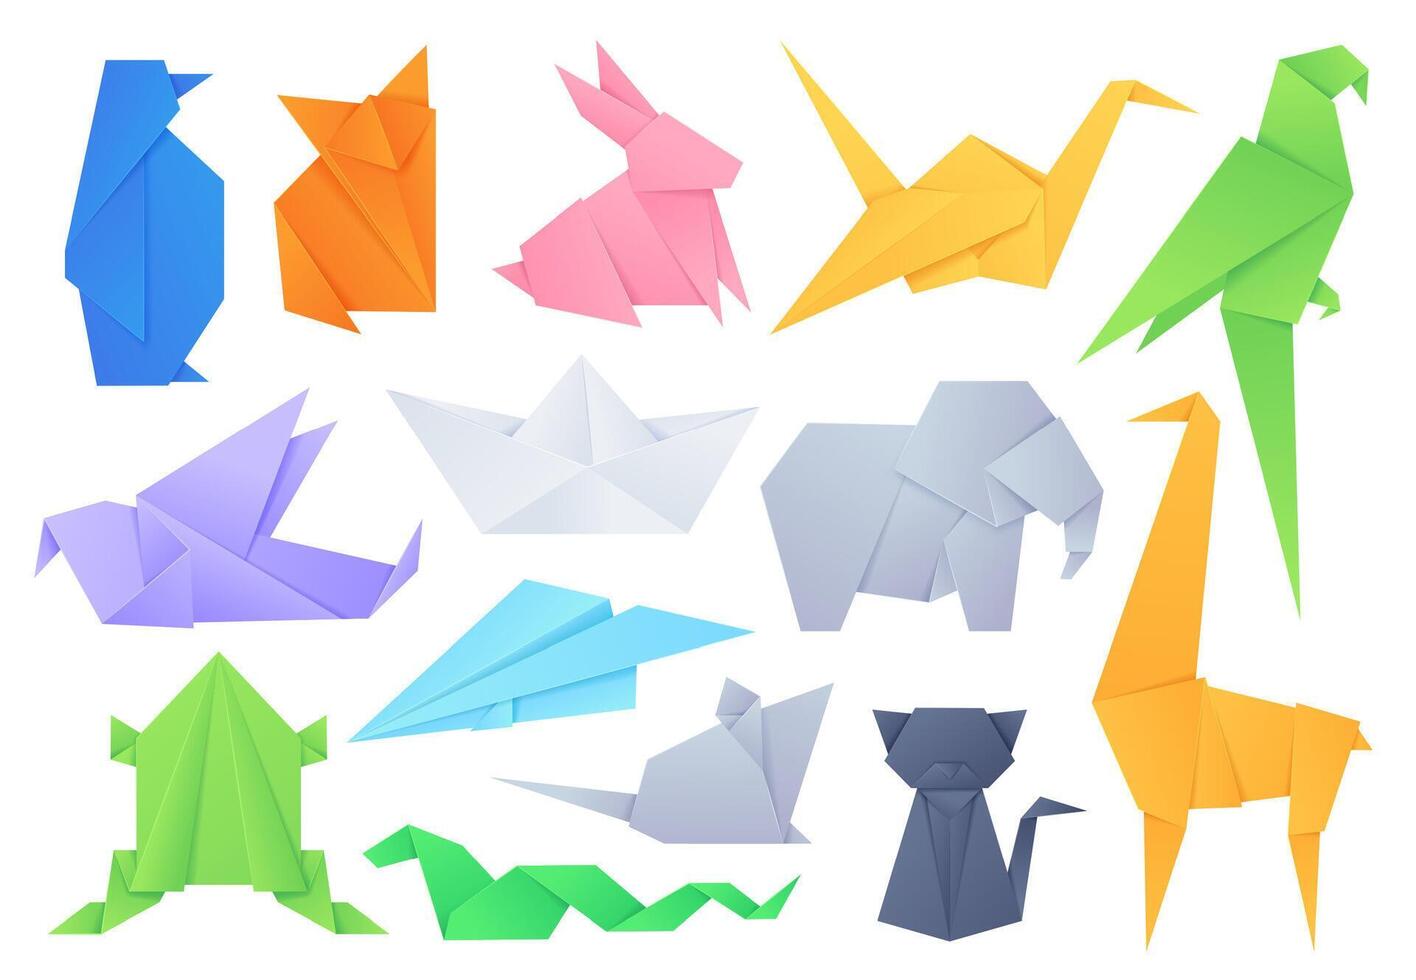 Origami animals. Geometric folded shapes for japanese game paper boat and plane, crane, birds, cat, elephant and rabbit. Crafting hobby vector set